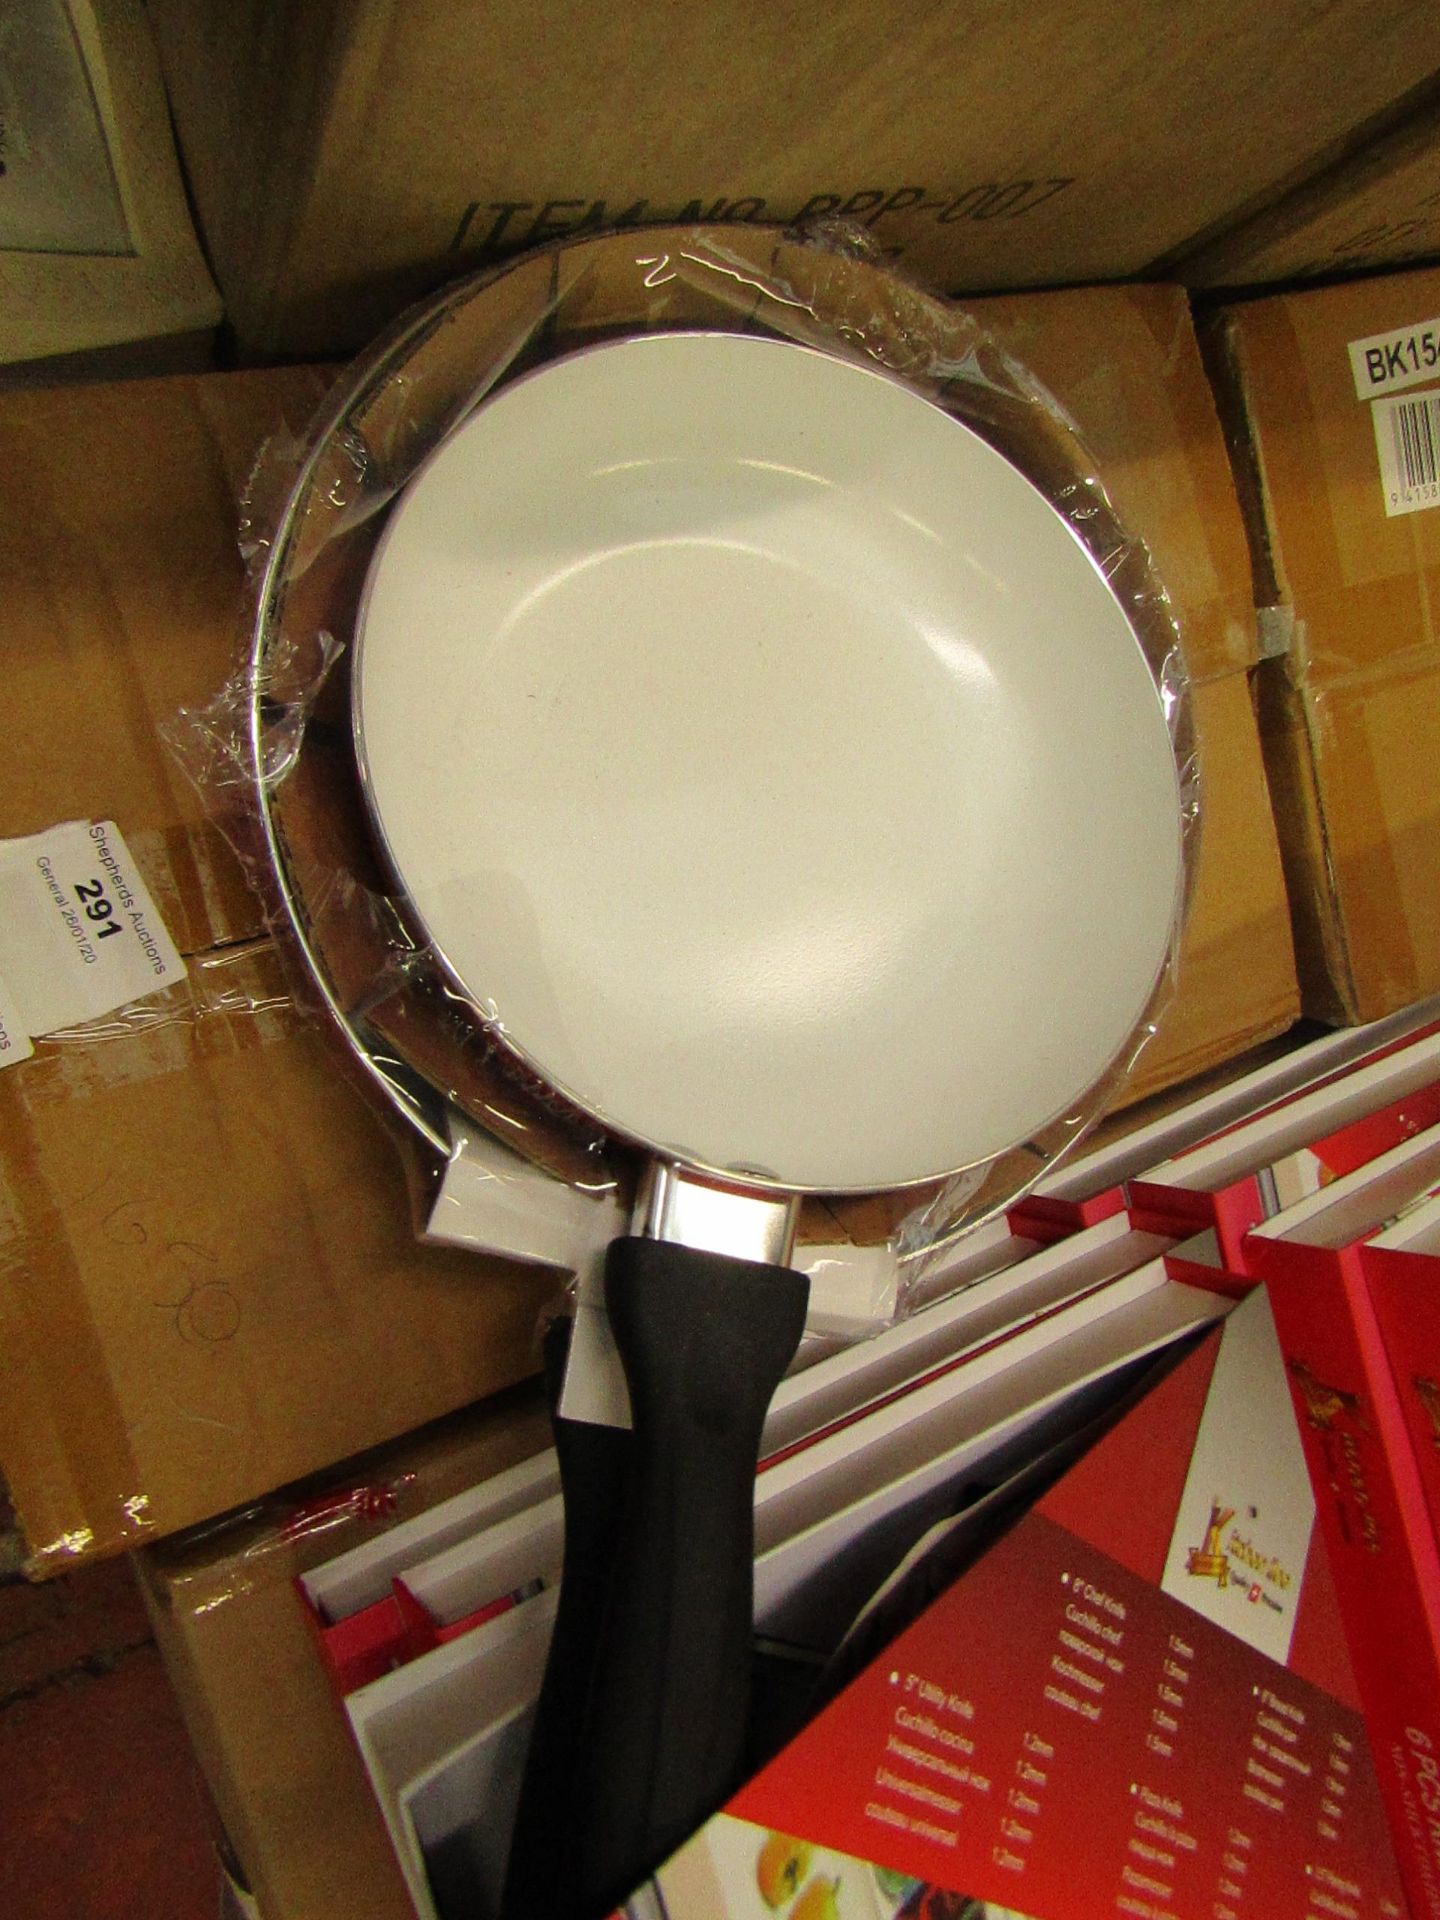 Set of 2 Frying Pans in Red. New & Boxed